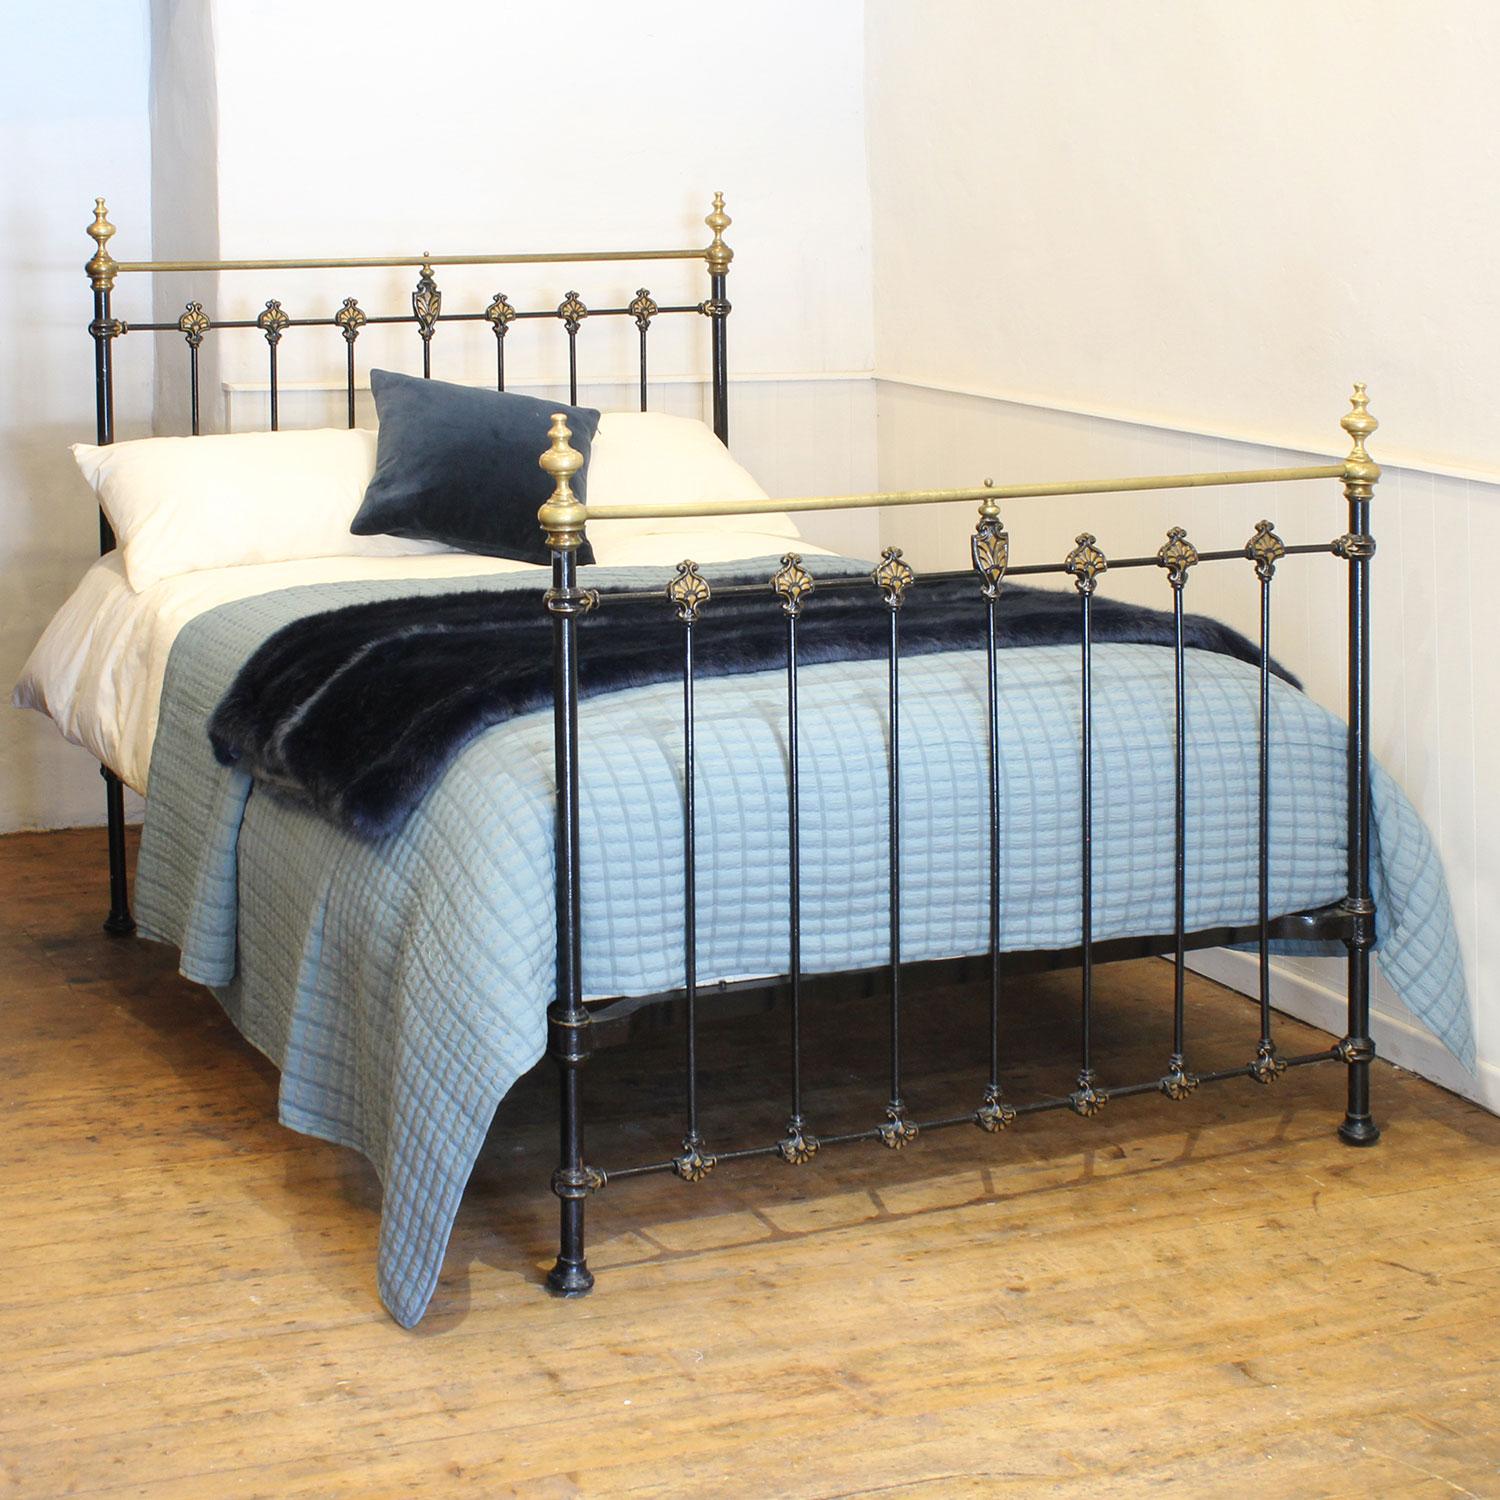 A cast iron and brass antique bed, finished in black and hand painted gold lining on the castings. The straight brass top rail has naturally tarnished as have the decorative brass knobs. The brass could be repolished if required.

This bed accepts